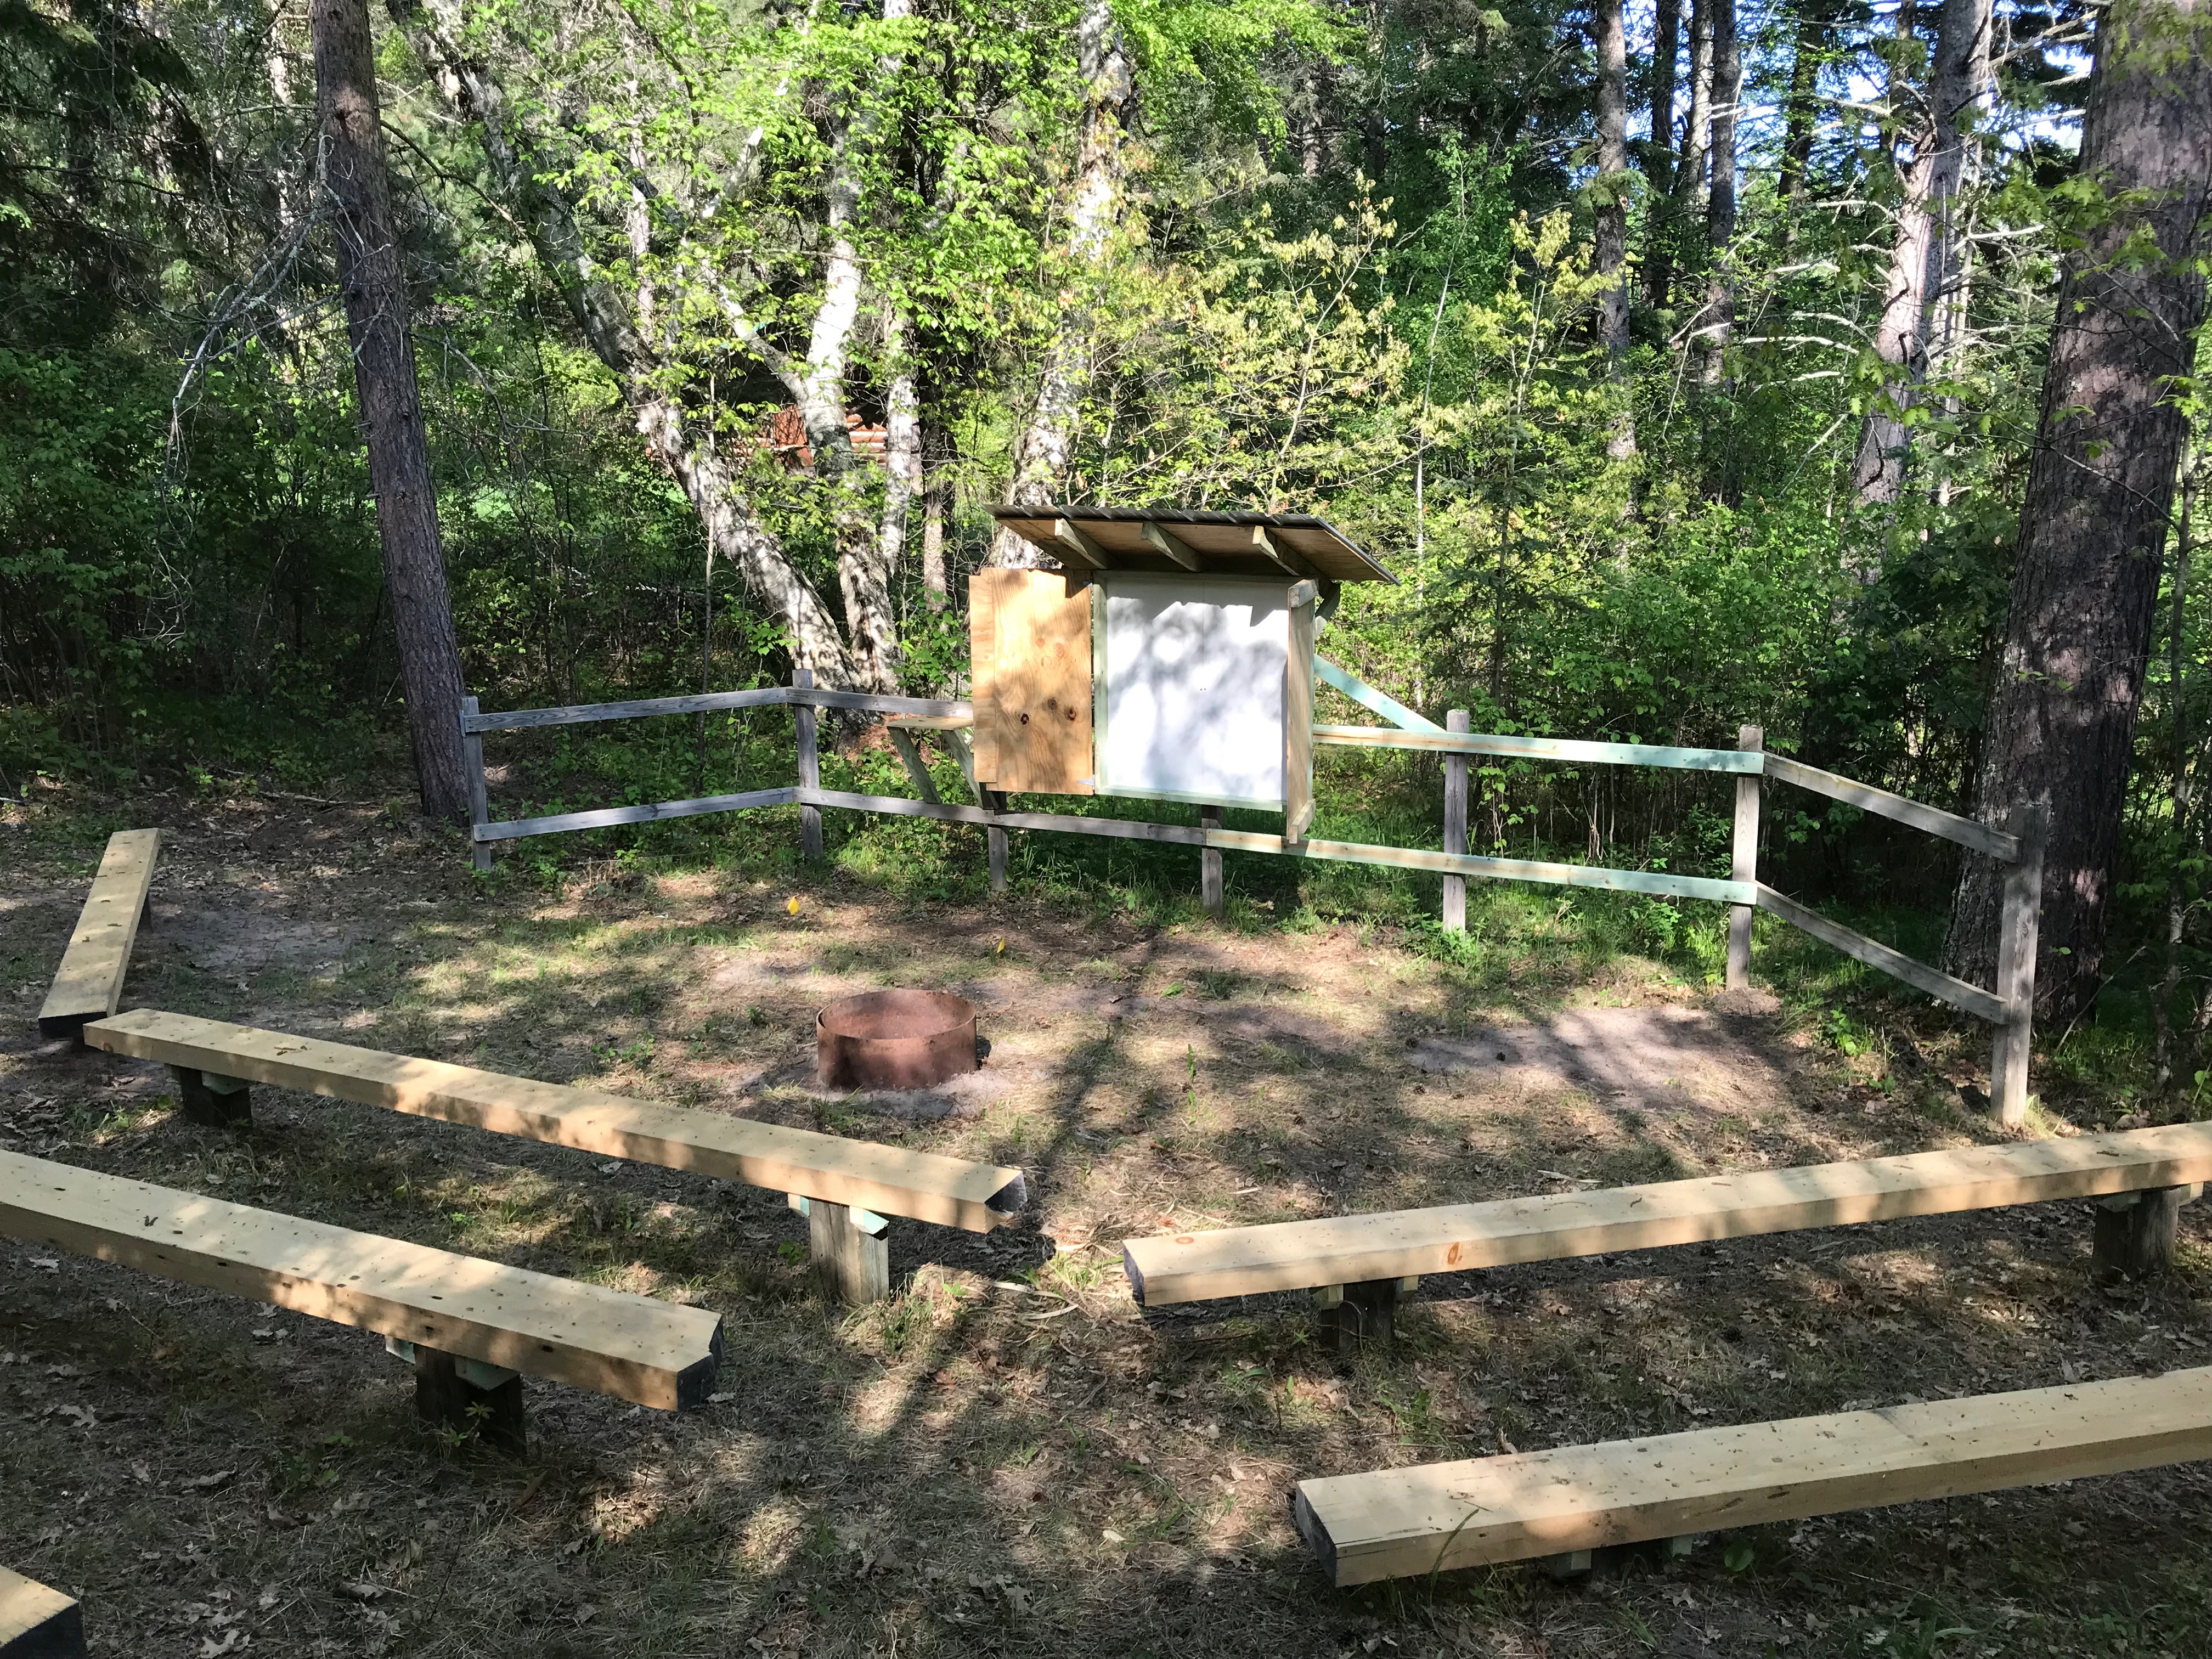 Hobson Memorial Forest renovated amphitheater and whiteboard.